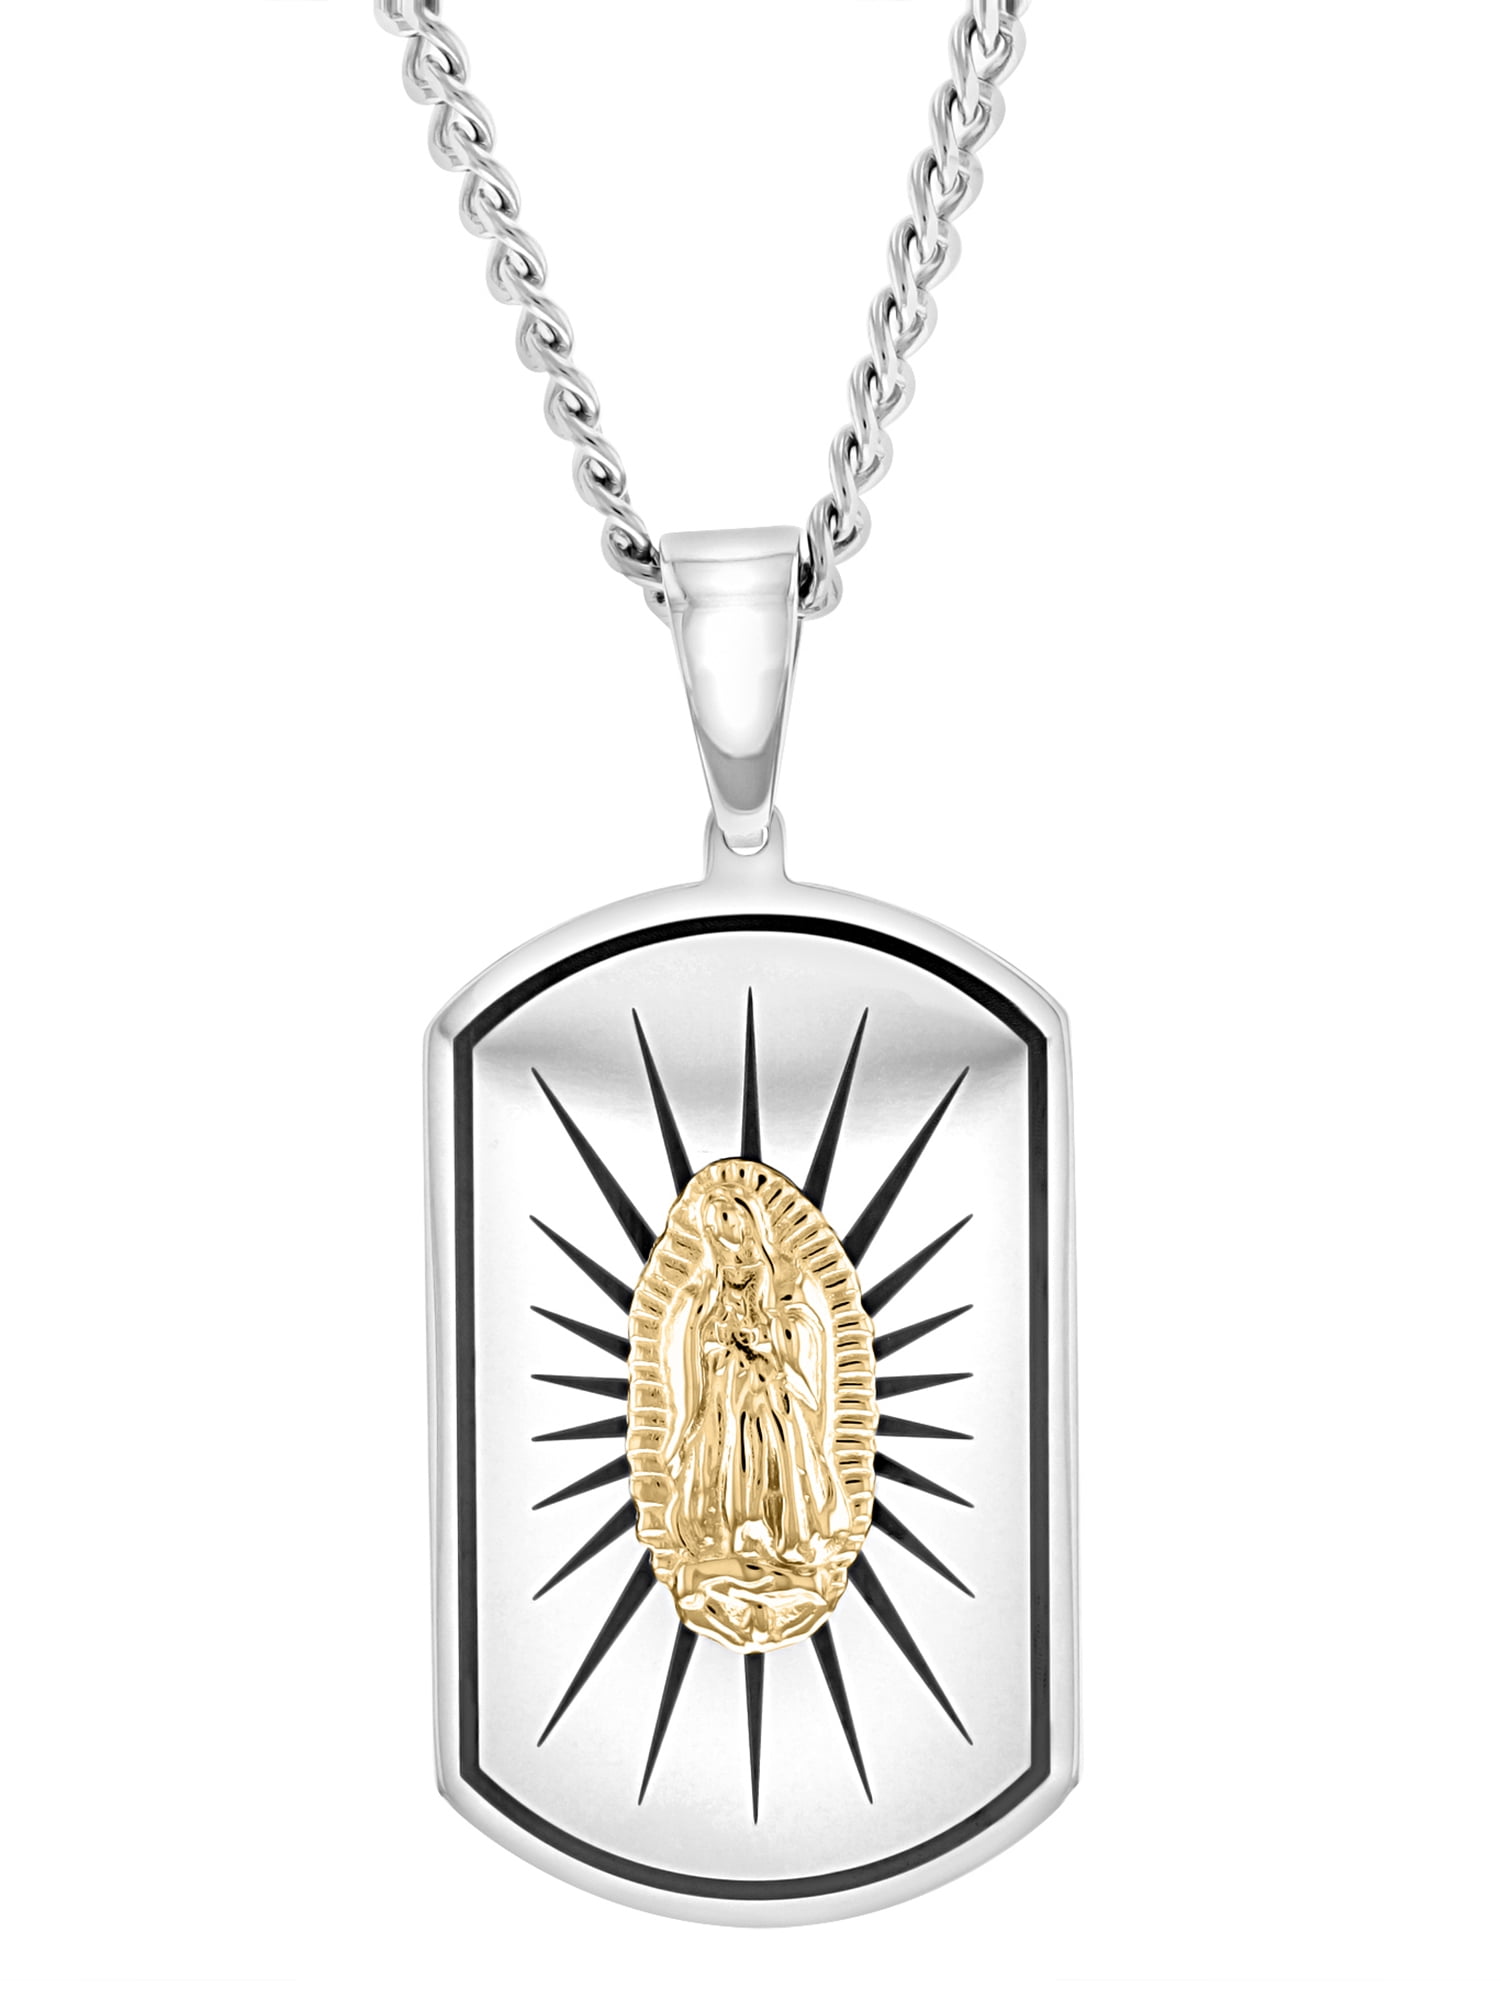 Stainless Steel Religious Catholic Virgin Mary Dog Tag Pendant Necklace Chain 